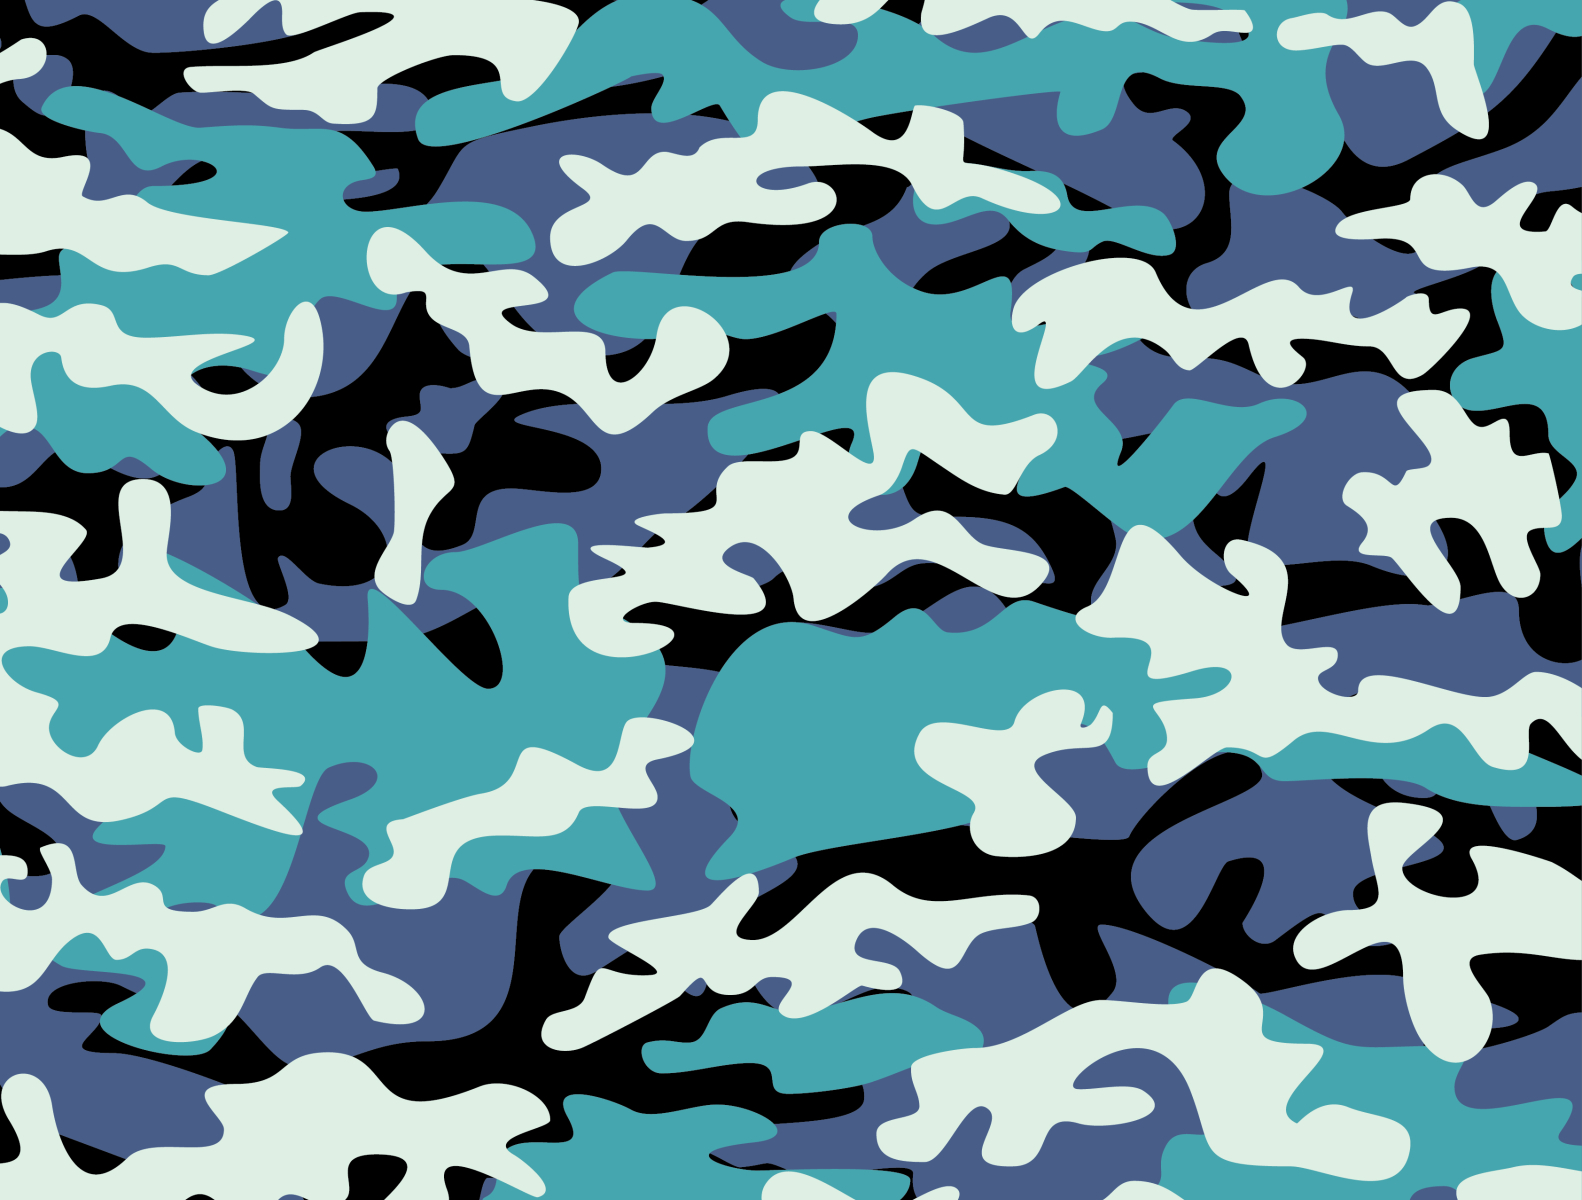 Camouflage Pattern Design by Md Badhon on Dribbble